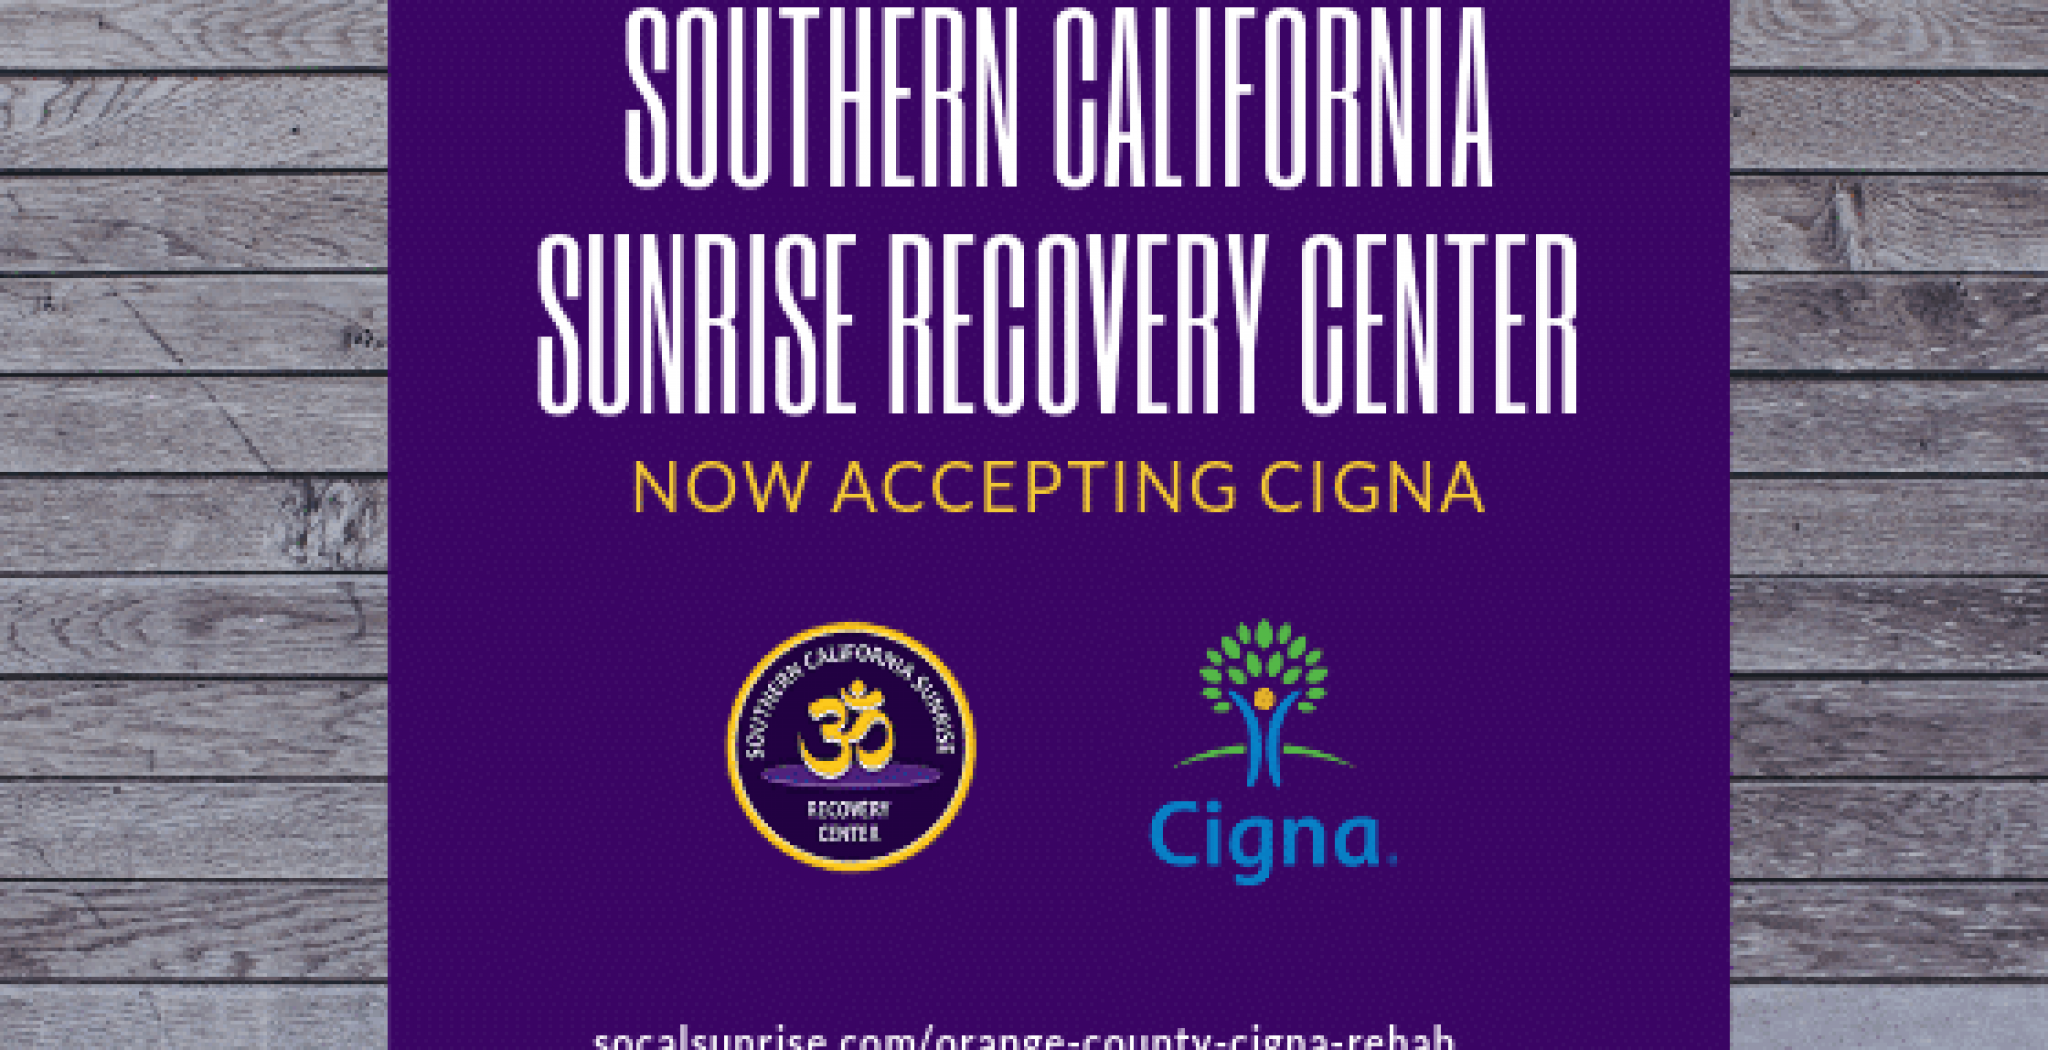 SOUTHERN-CALIFORNIA-SUNRISE-RECOVERY-CENTER-5